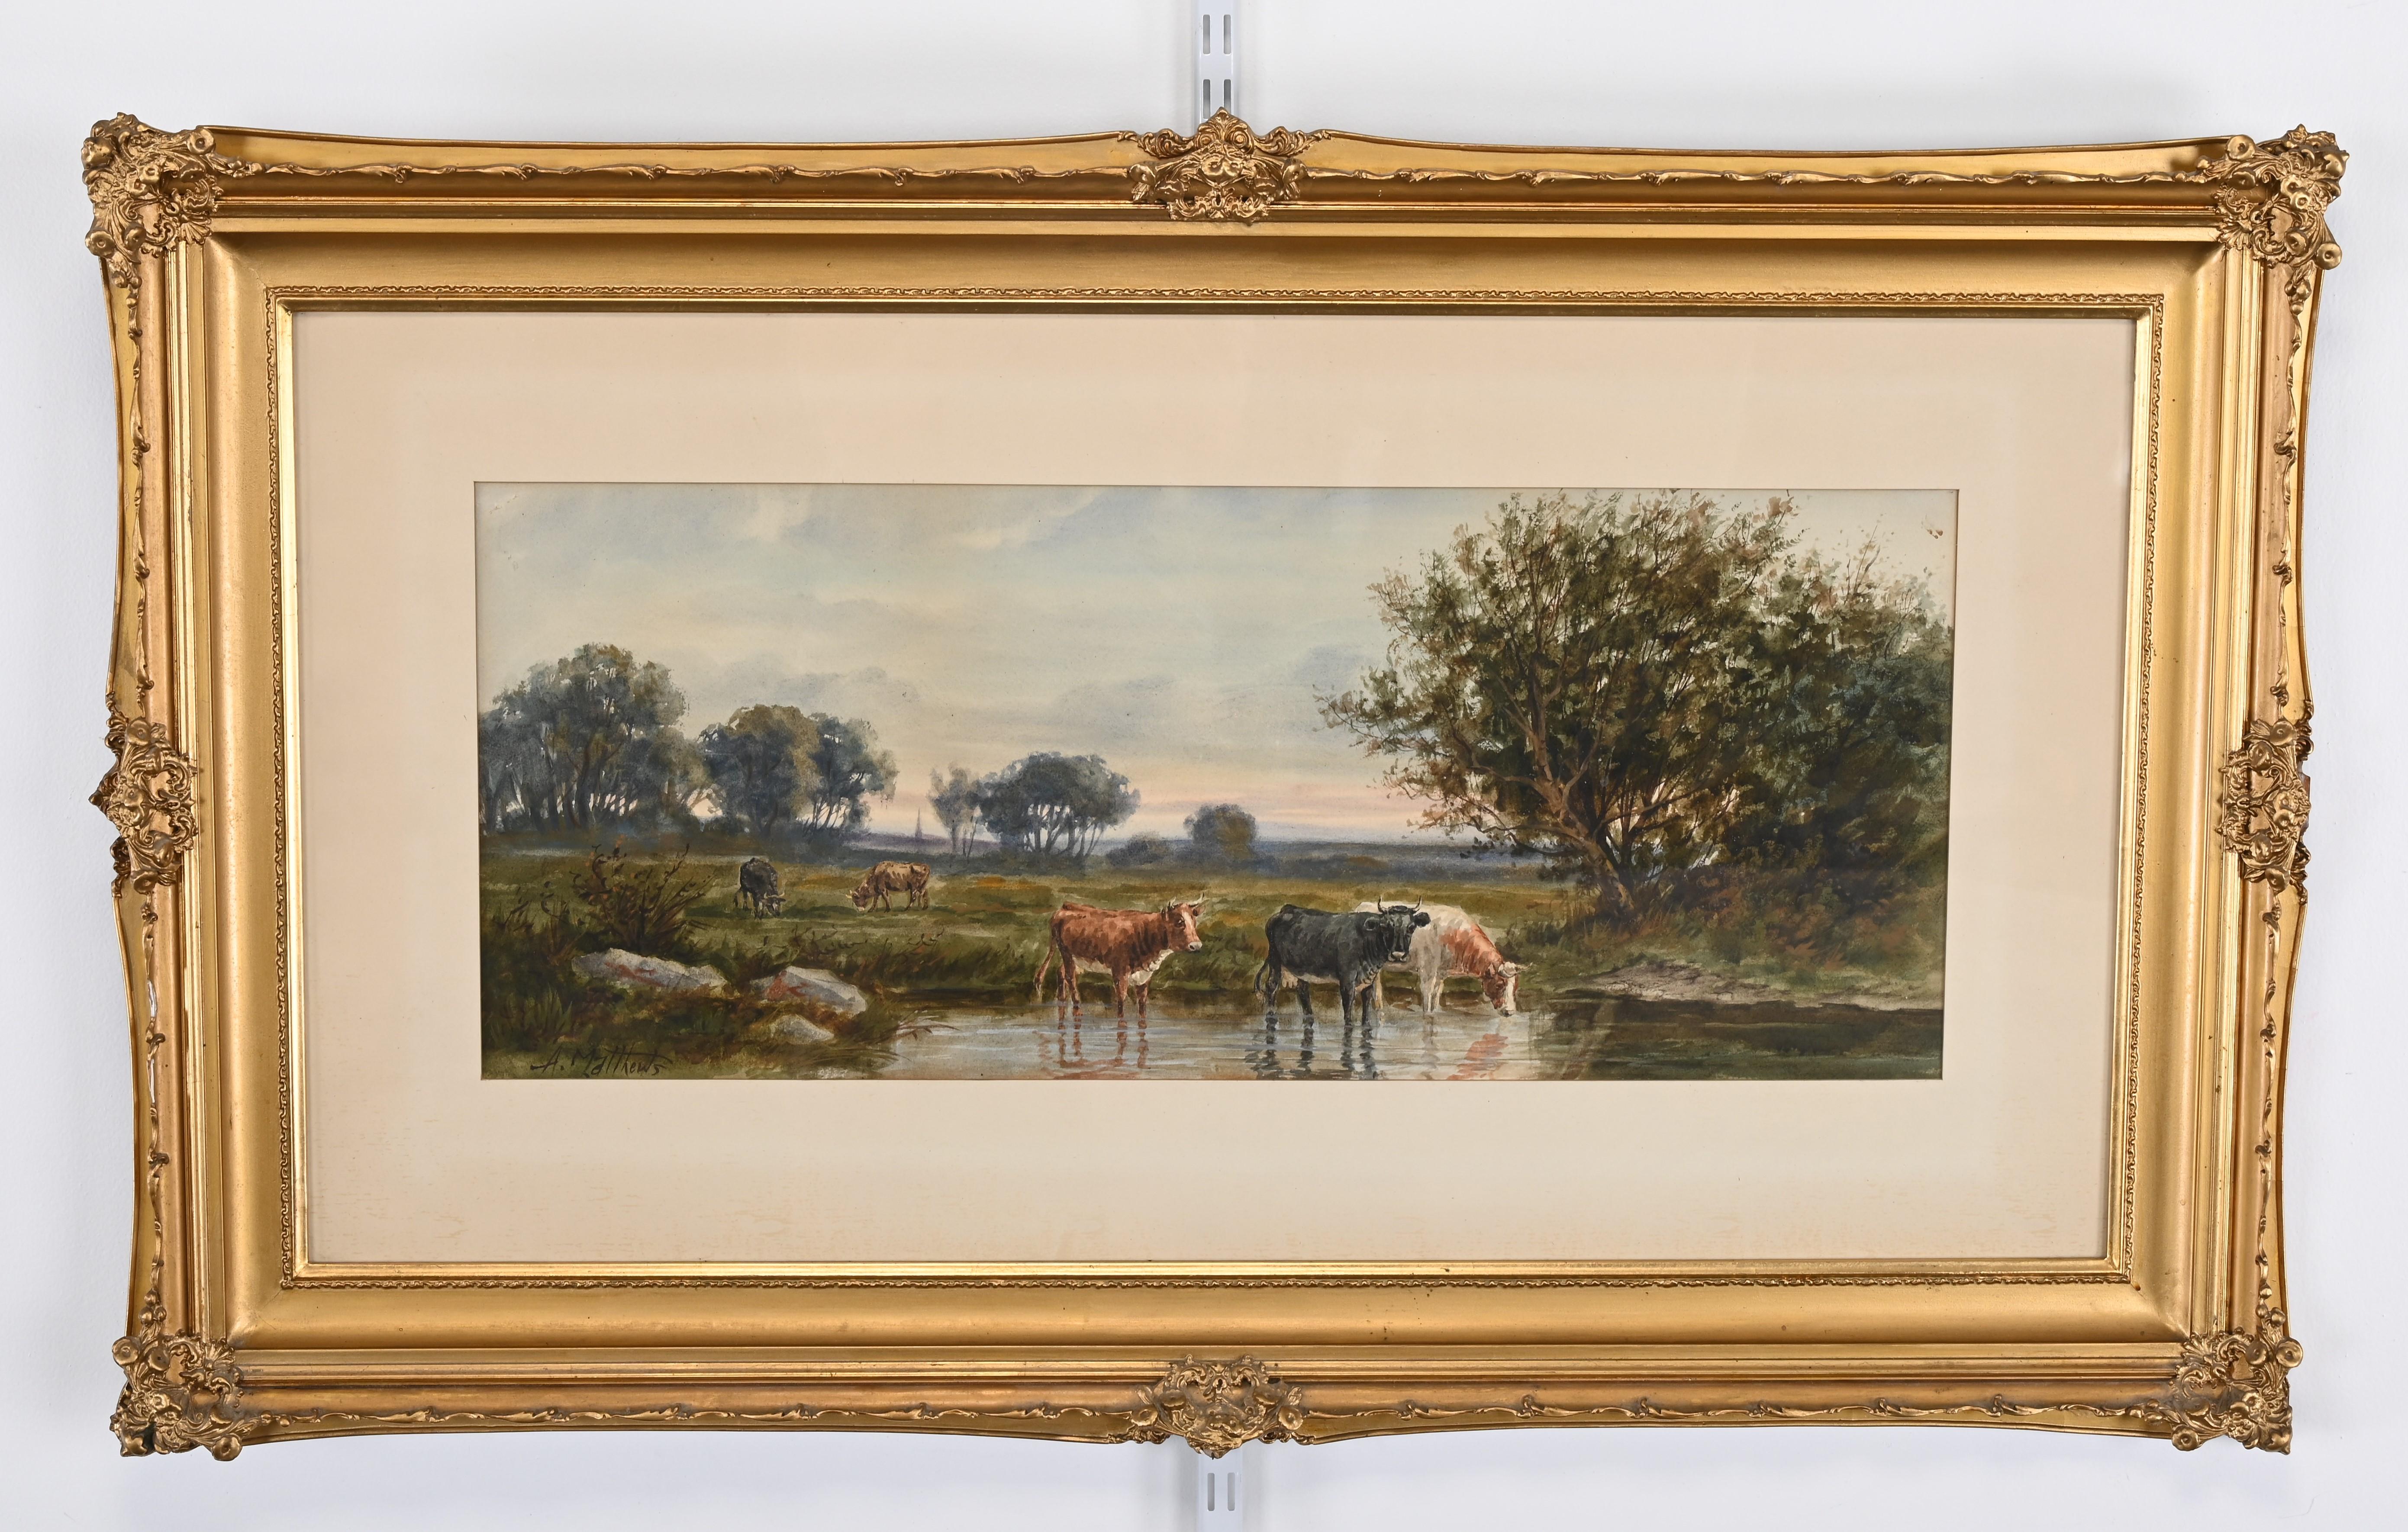 A wonderful watercolor painting by A. Matthews of a landscape with cattle watering. This 19th-century painting is framed in a period Late Victorian gold-leaf frame. The painting is aesthetically pleasing and well-executed. The colors are distinctive